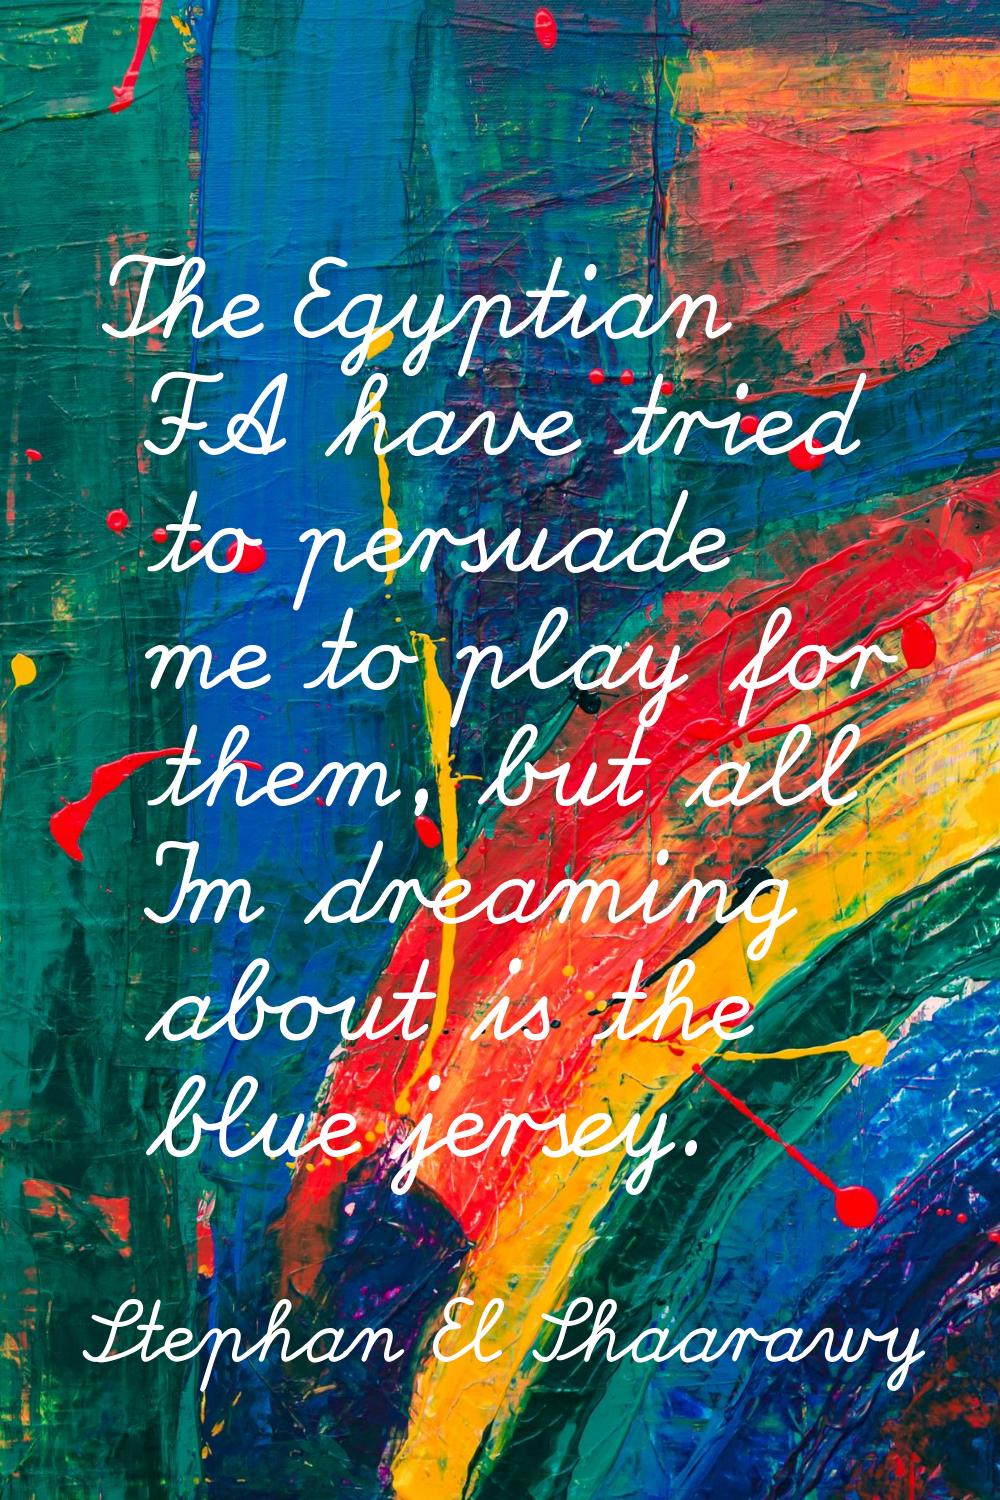 The Egyptian FA have tried to persuade me to play for them, but all I'm dreaming about is the blue 